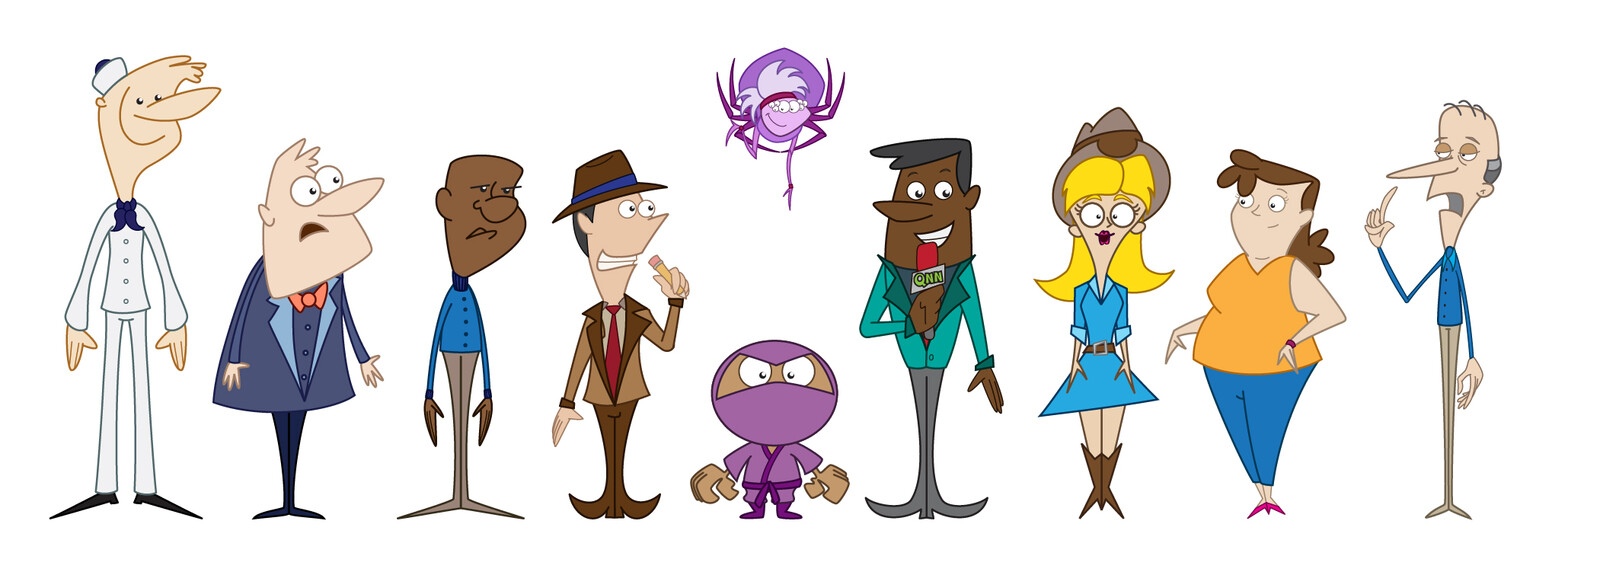 Character Designs &amp; Concepts for Quaver's Marvelous World of Music